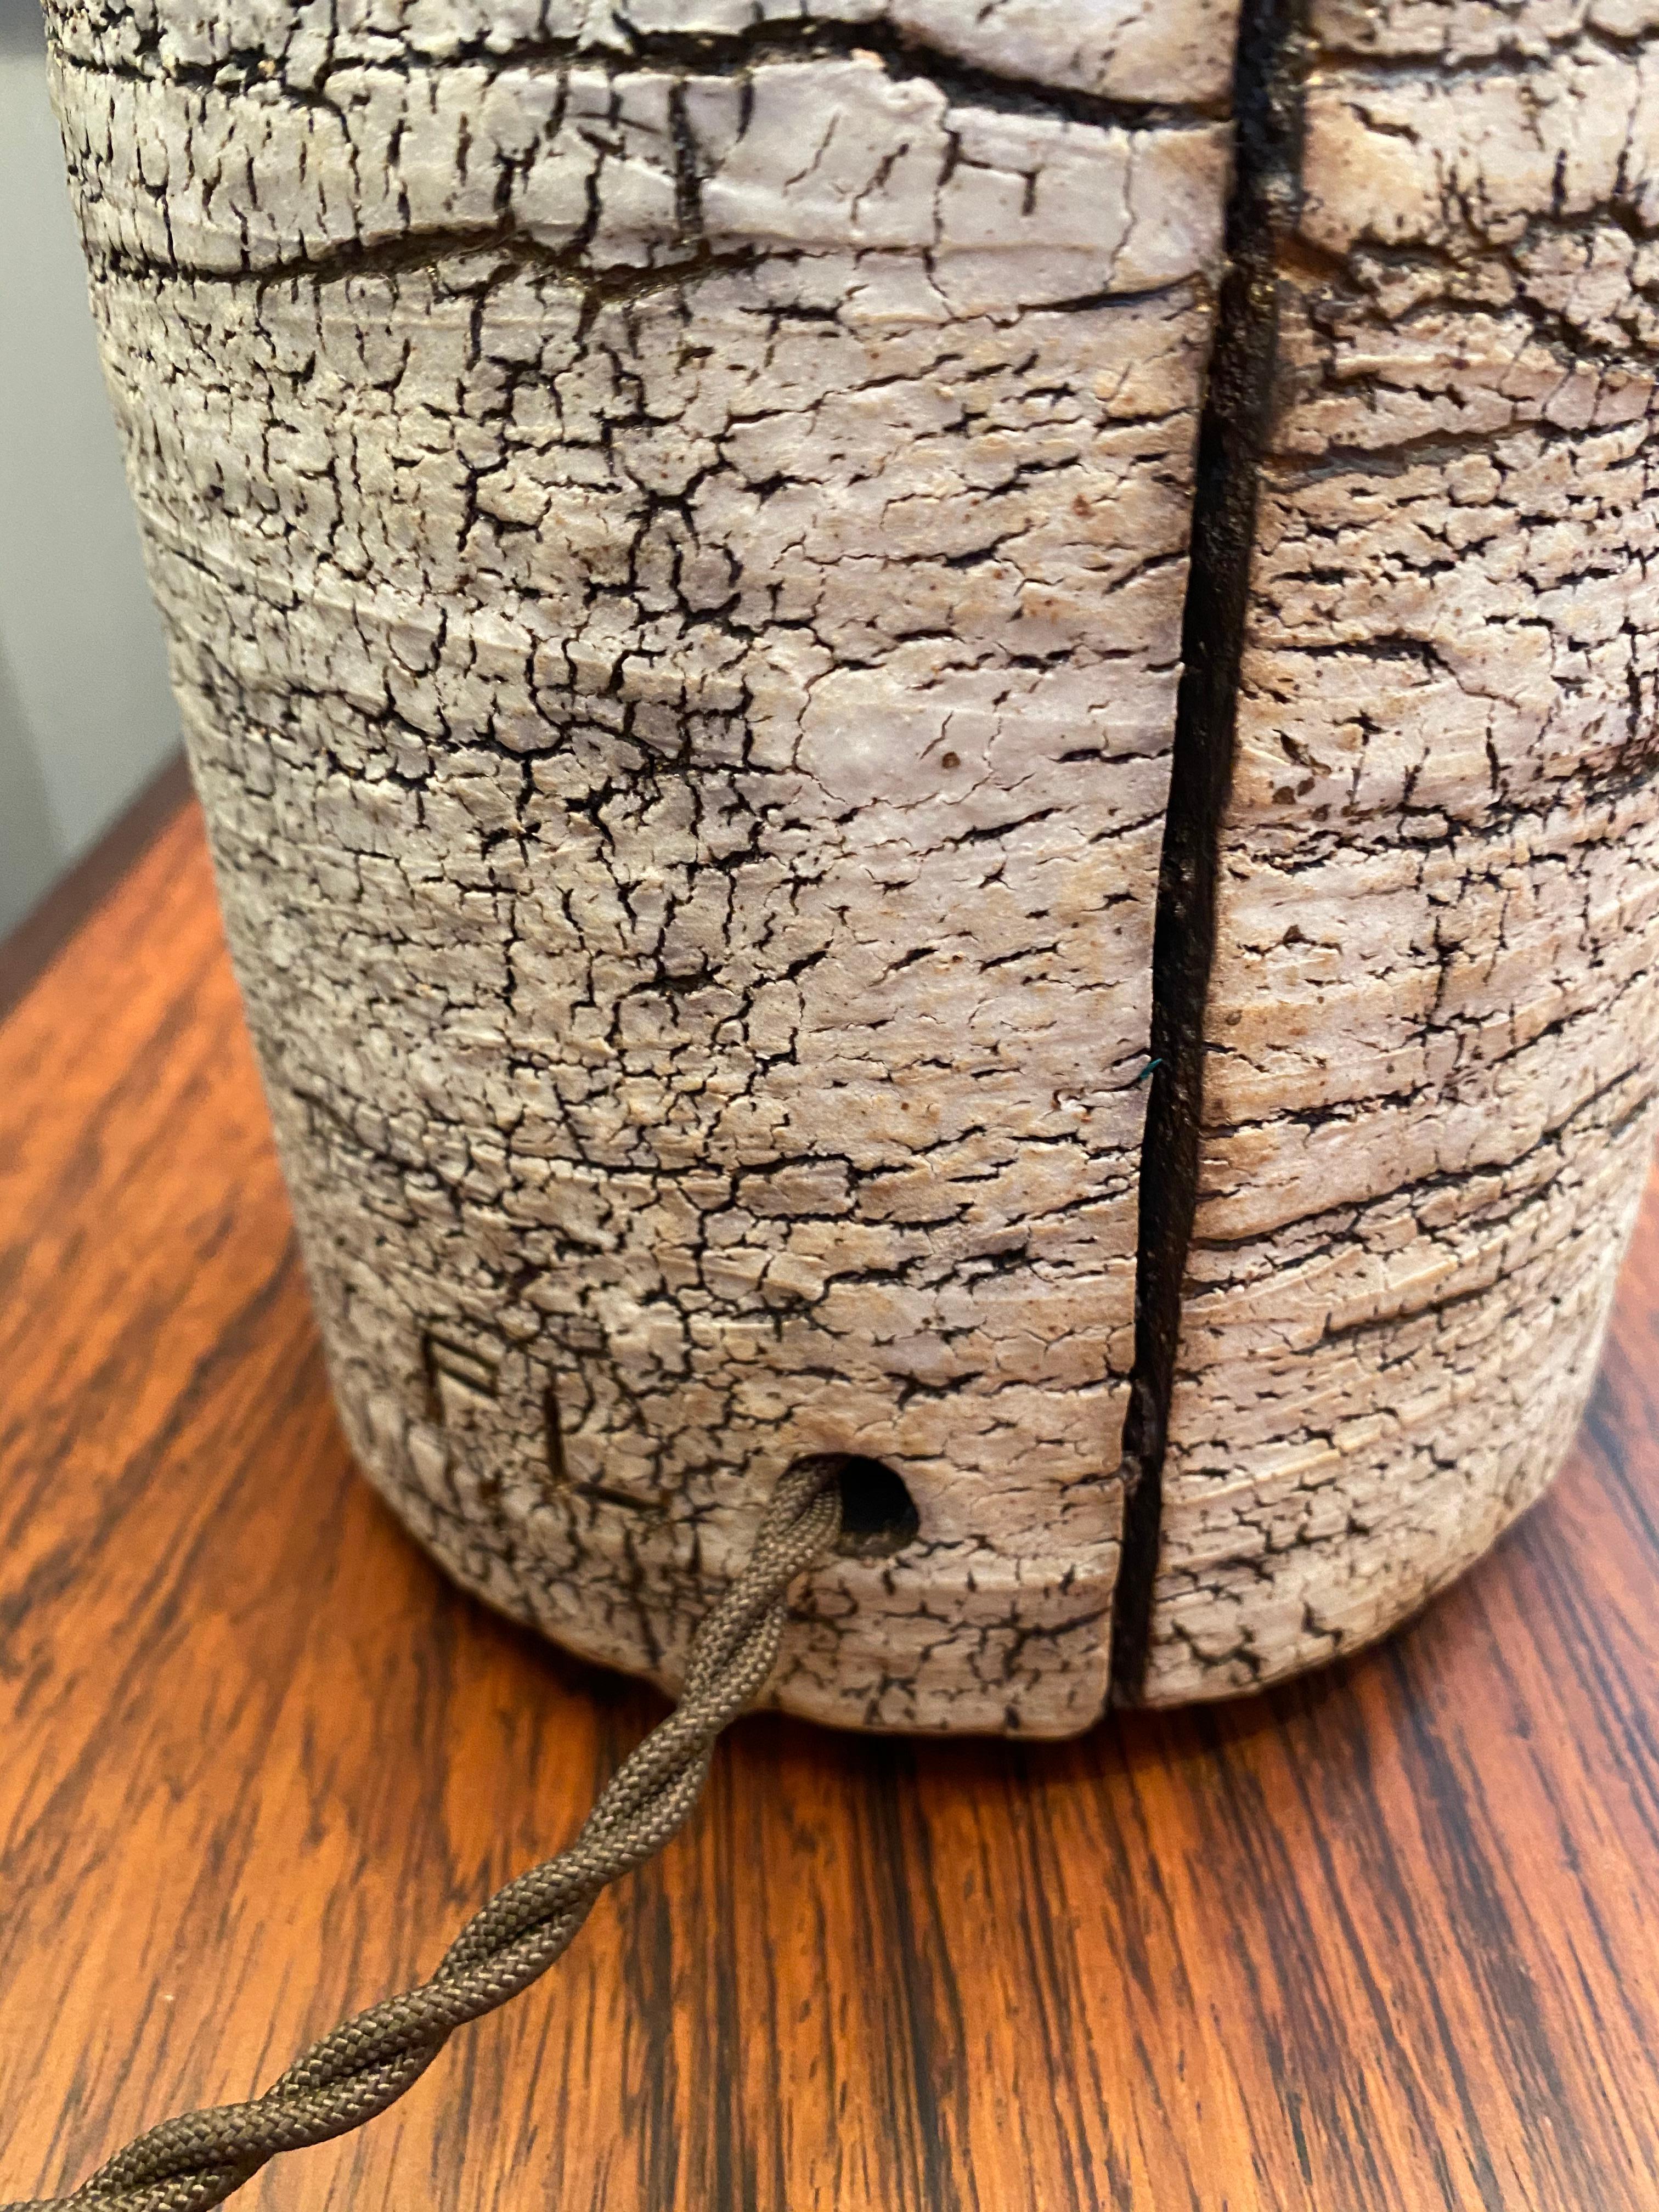 Peter Lane is an American ceramic artist whose pieces act as both works of Fine Art and as anchors to interior spaces, He introduced the birch bark finish in mid-2000s and this particular lamp is from his archive. He has become known for monumental